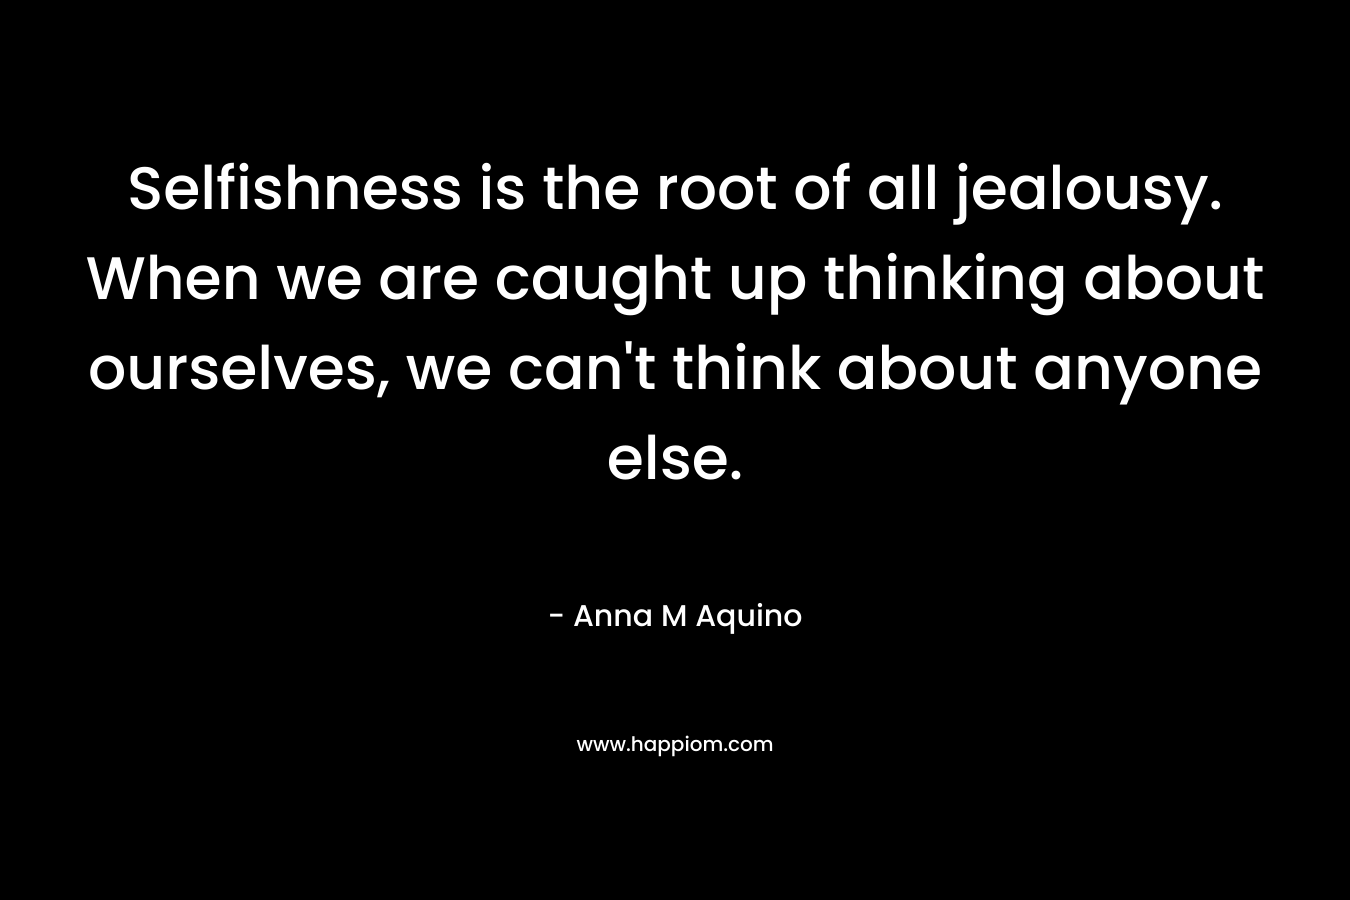 Selfishness is the root of all jealousy. When we are caught up thinking about ourselves, we can’t think about anyone else. – Anna M Aquino